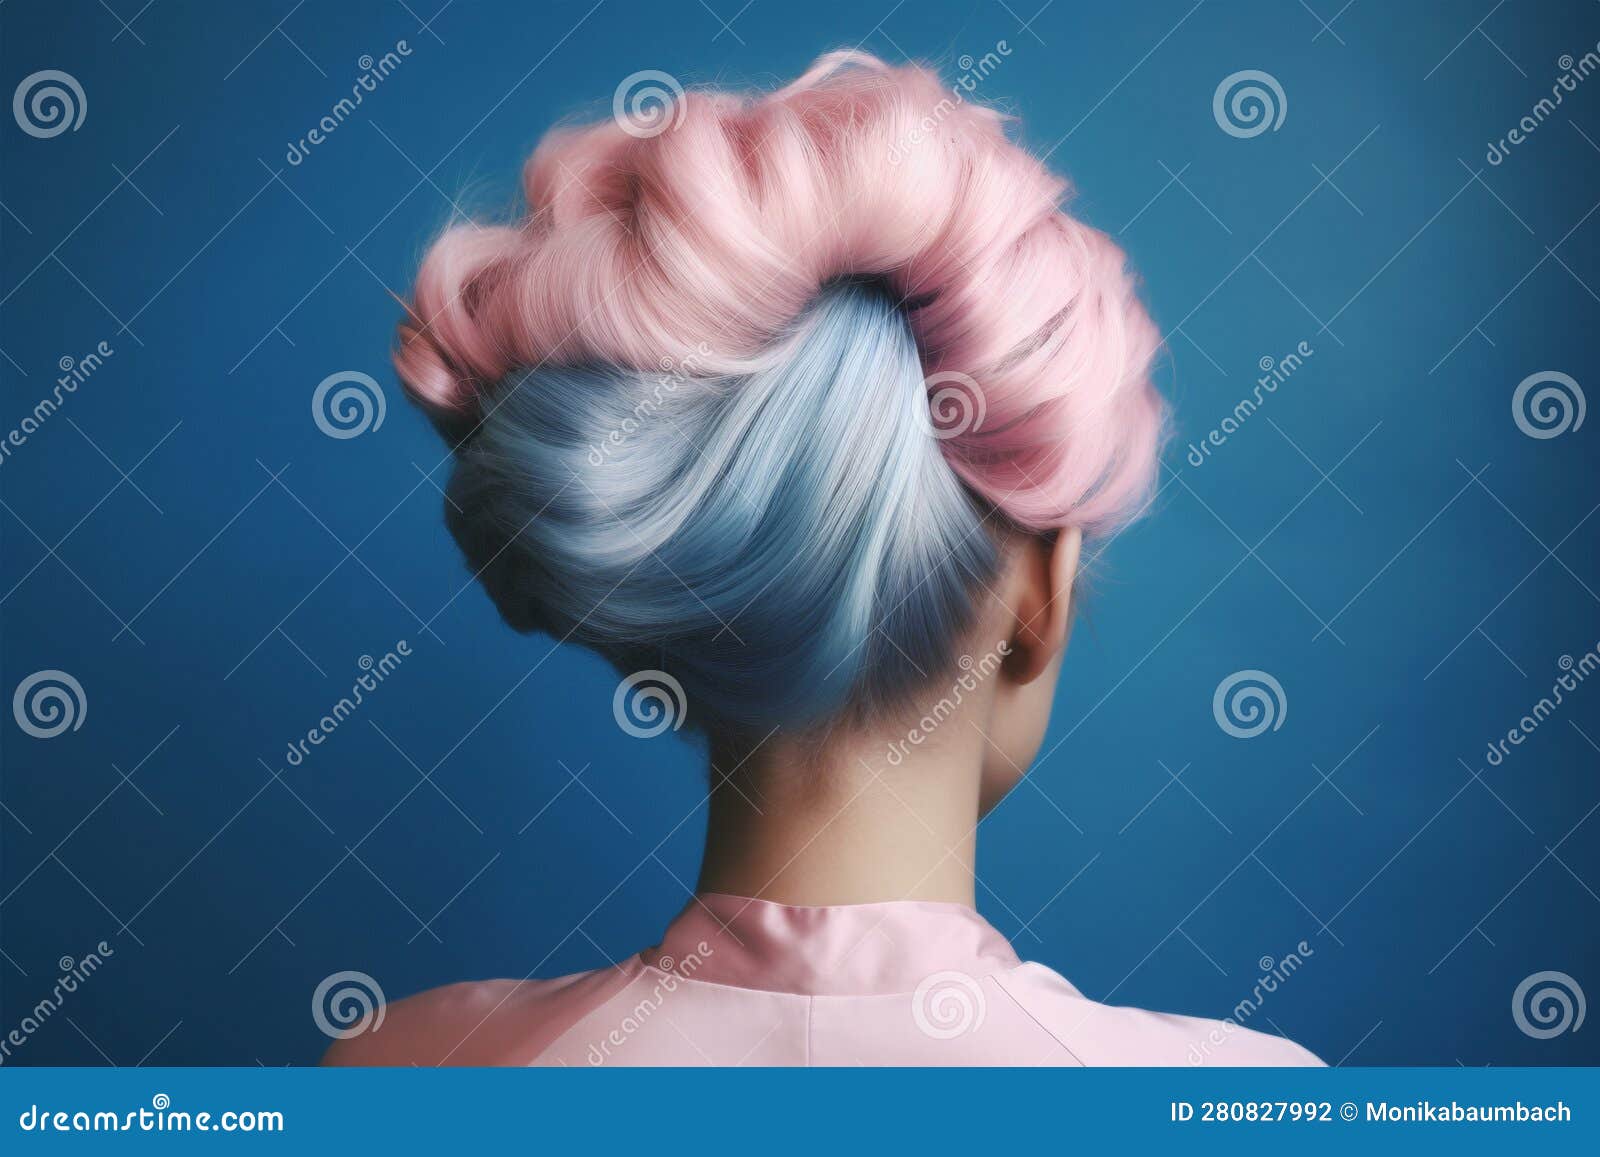 4. Pink and Blue Hair Curls: A Fun and Bold Look for Any Occasion - wide 3